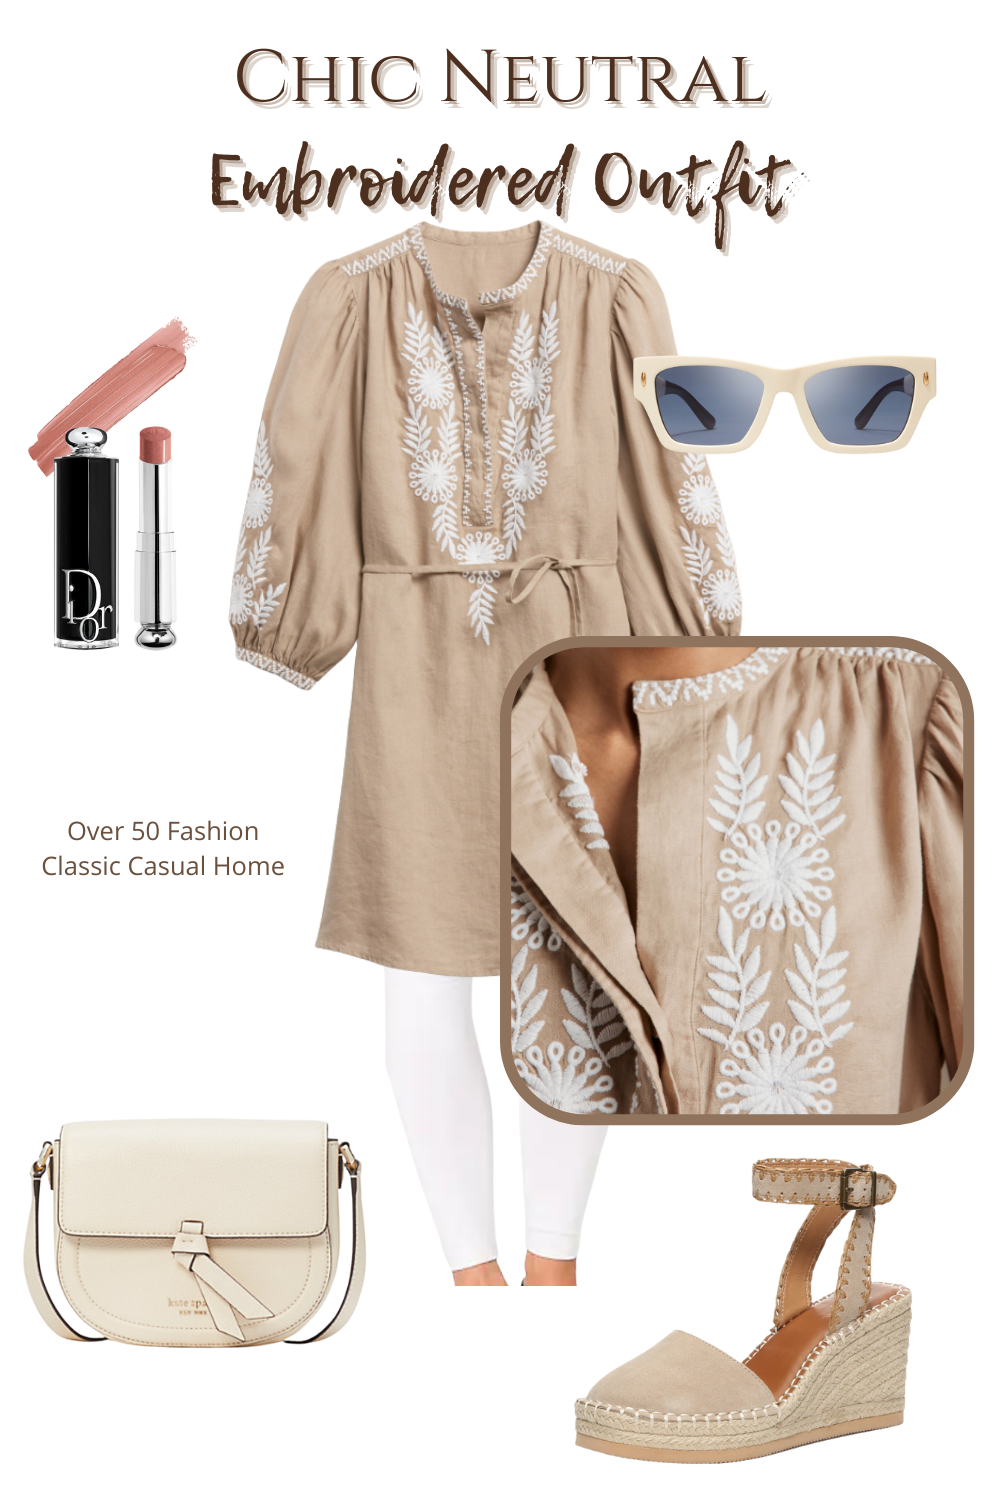 chic neutral embroidered outfit